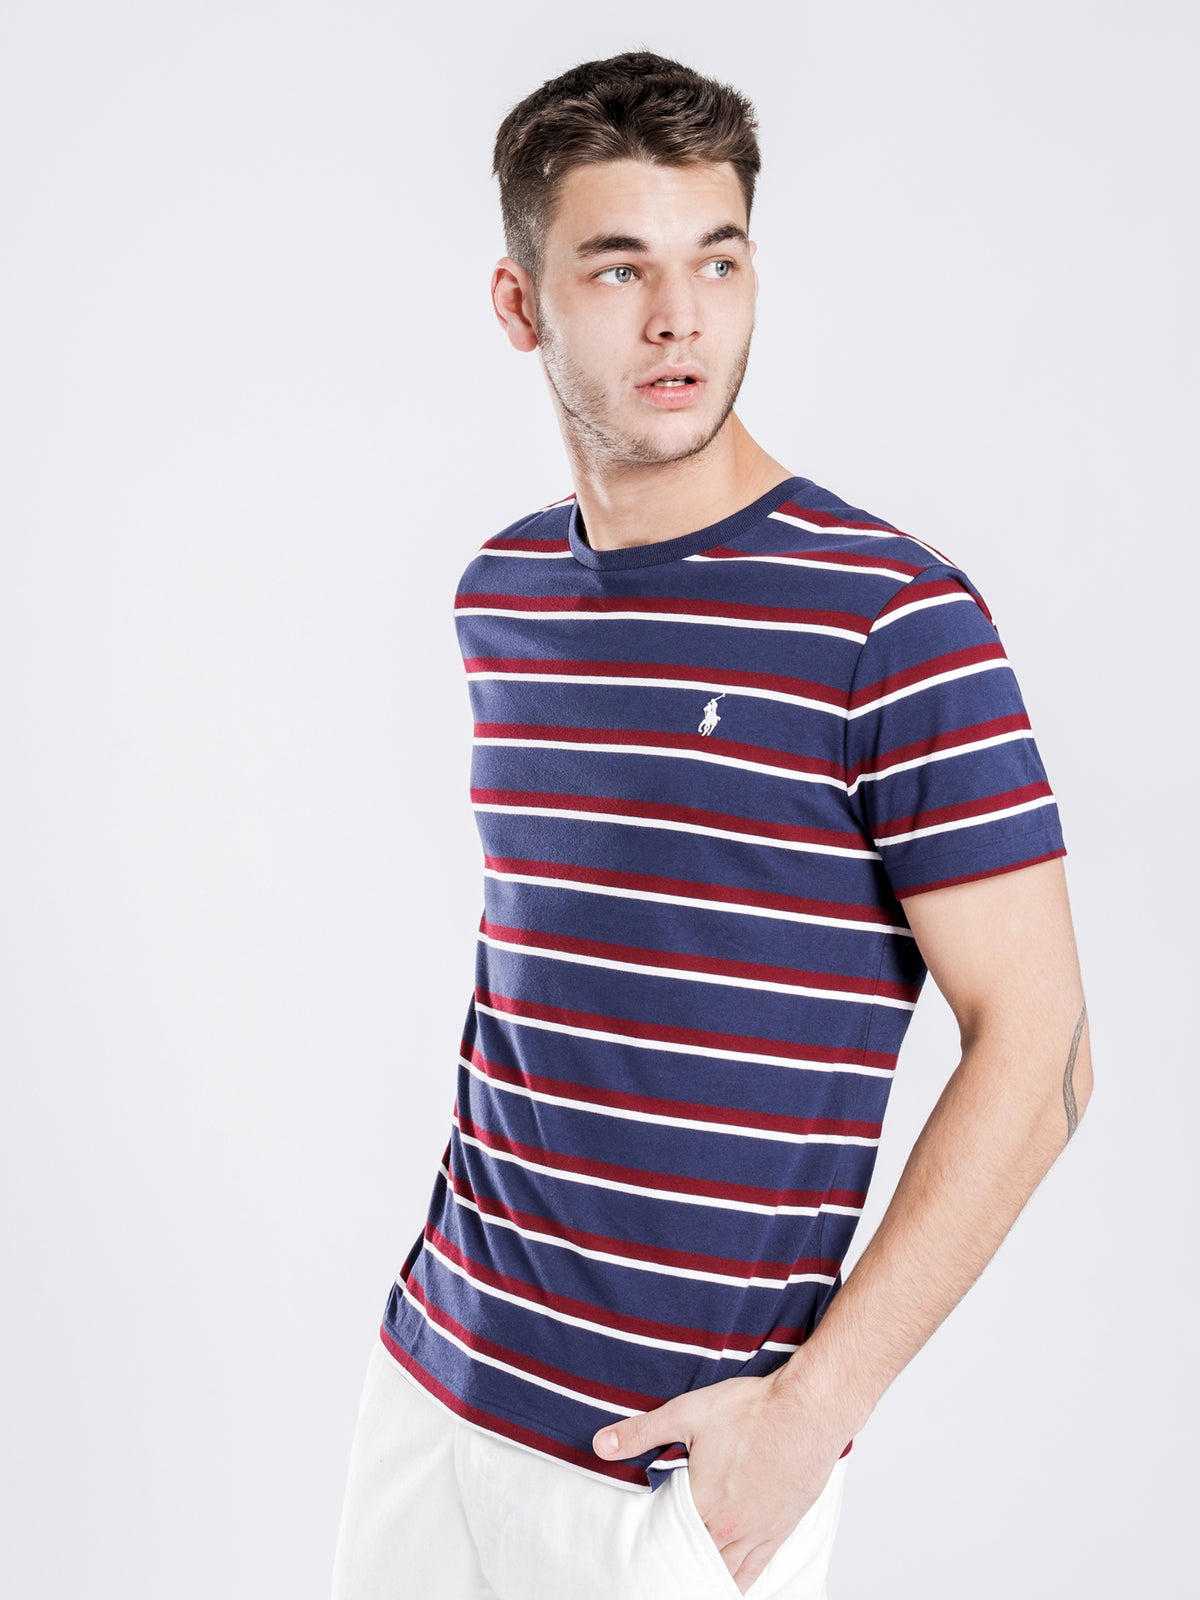 Classic Fit Short Sleeve T-Shirt in Navy Stripe